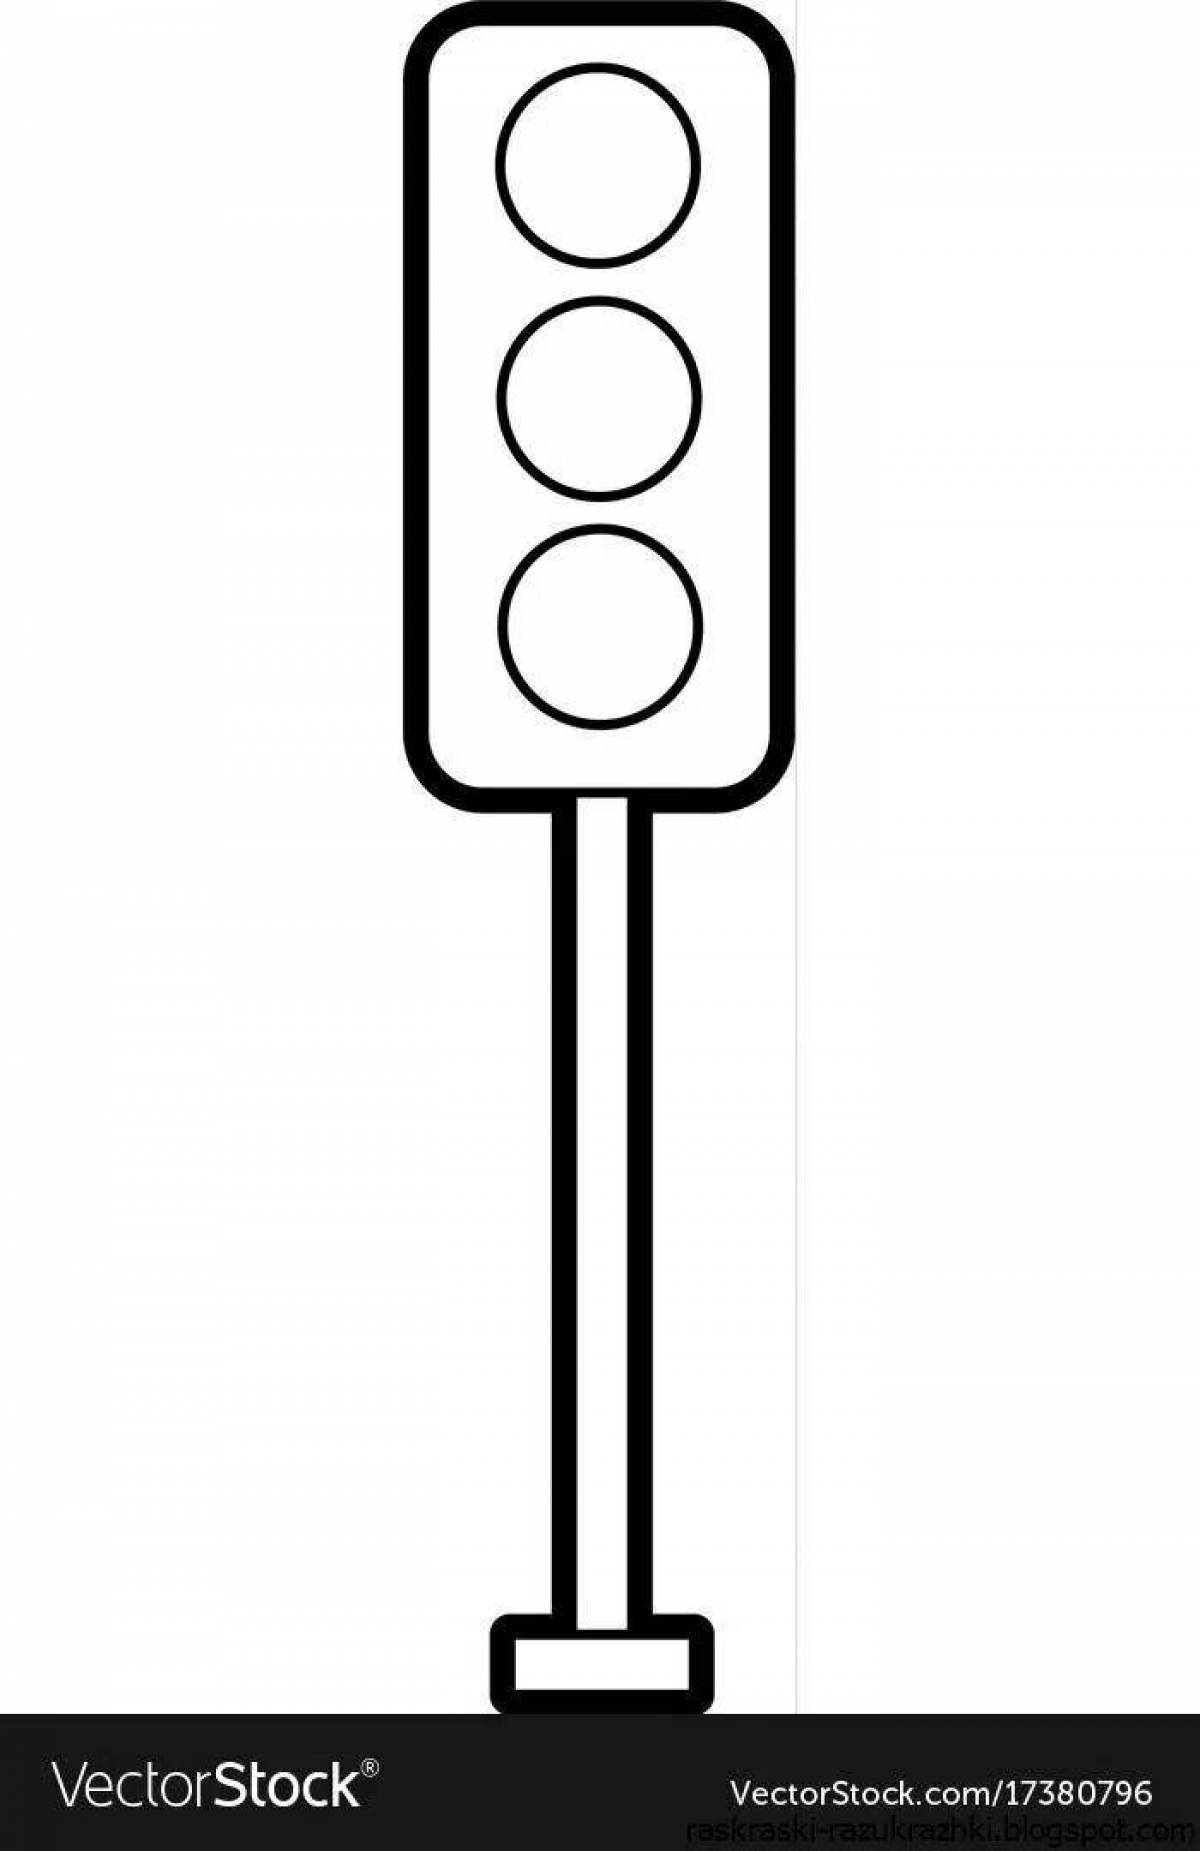 Traffic light picture for kids #4